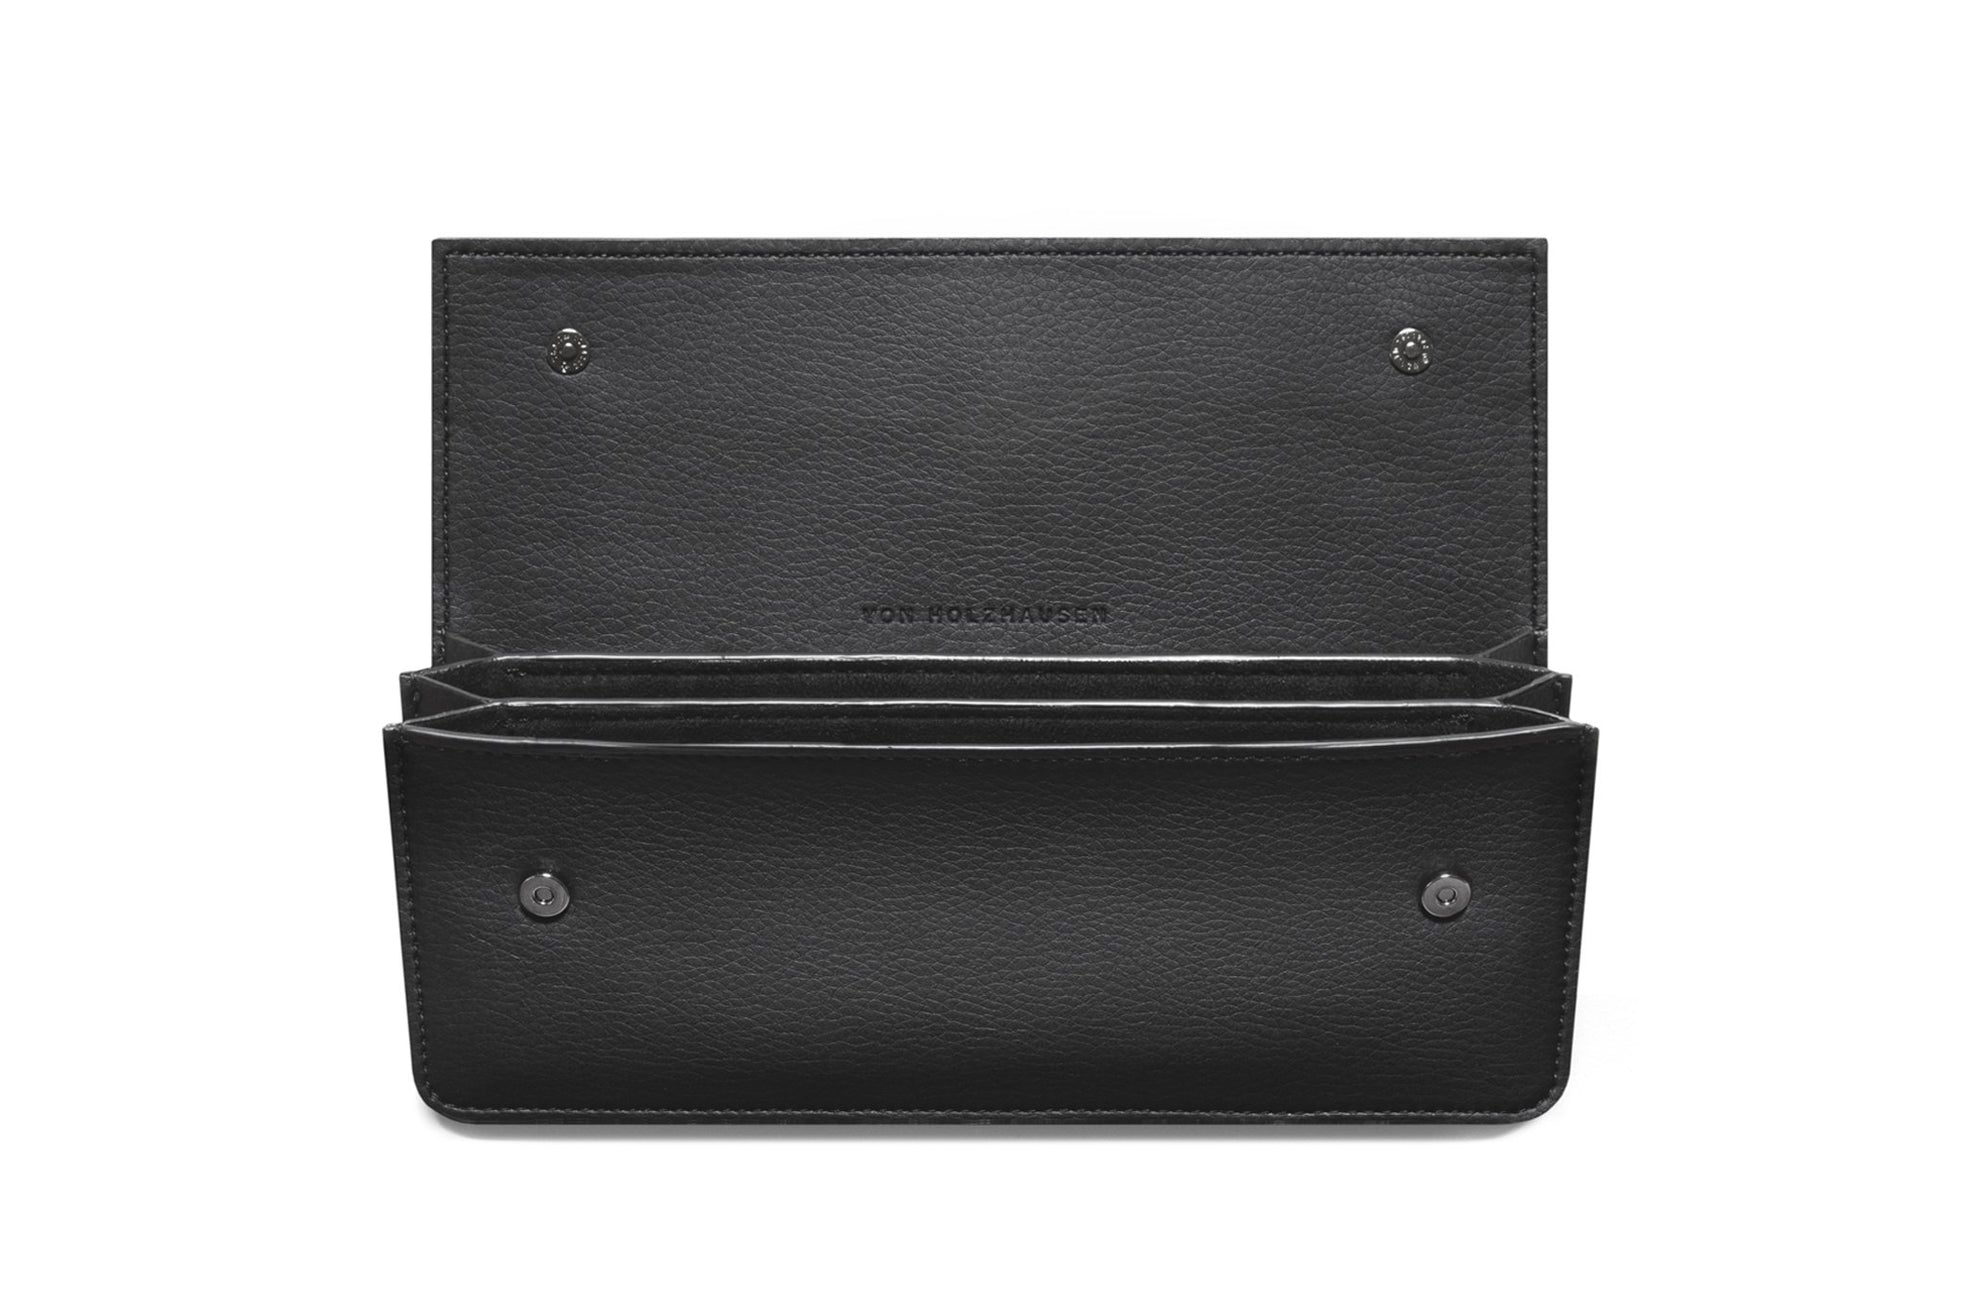 The Accordion Pouch - Sample Sale in Technik in Black image 6